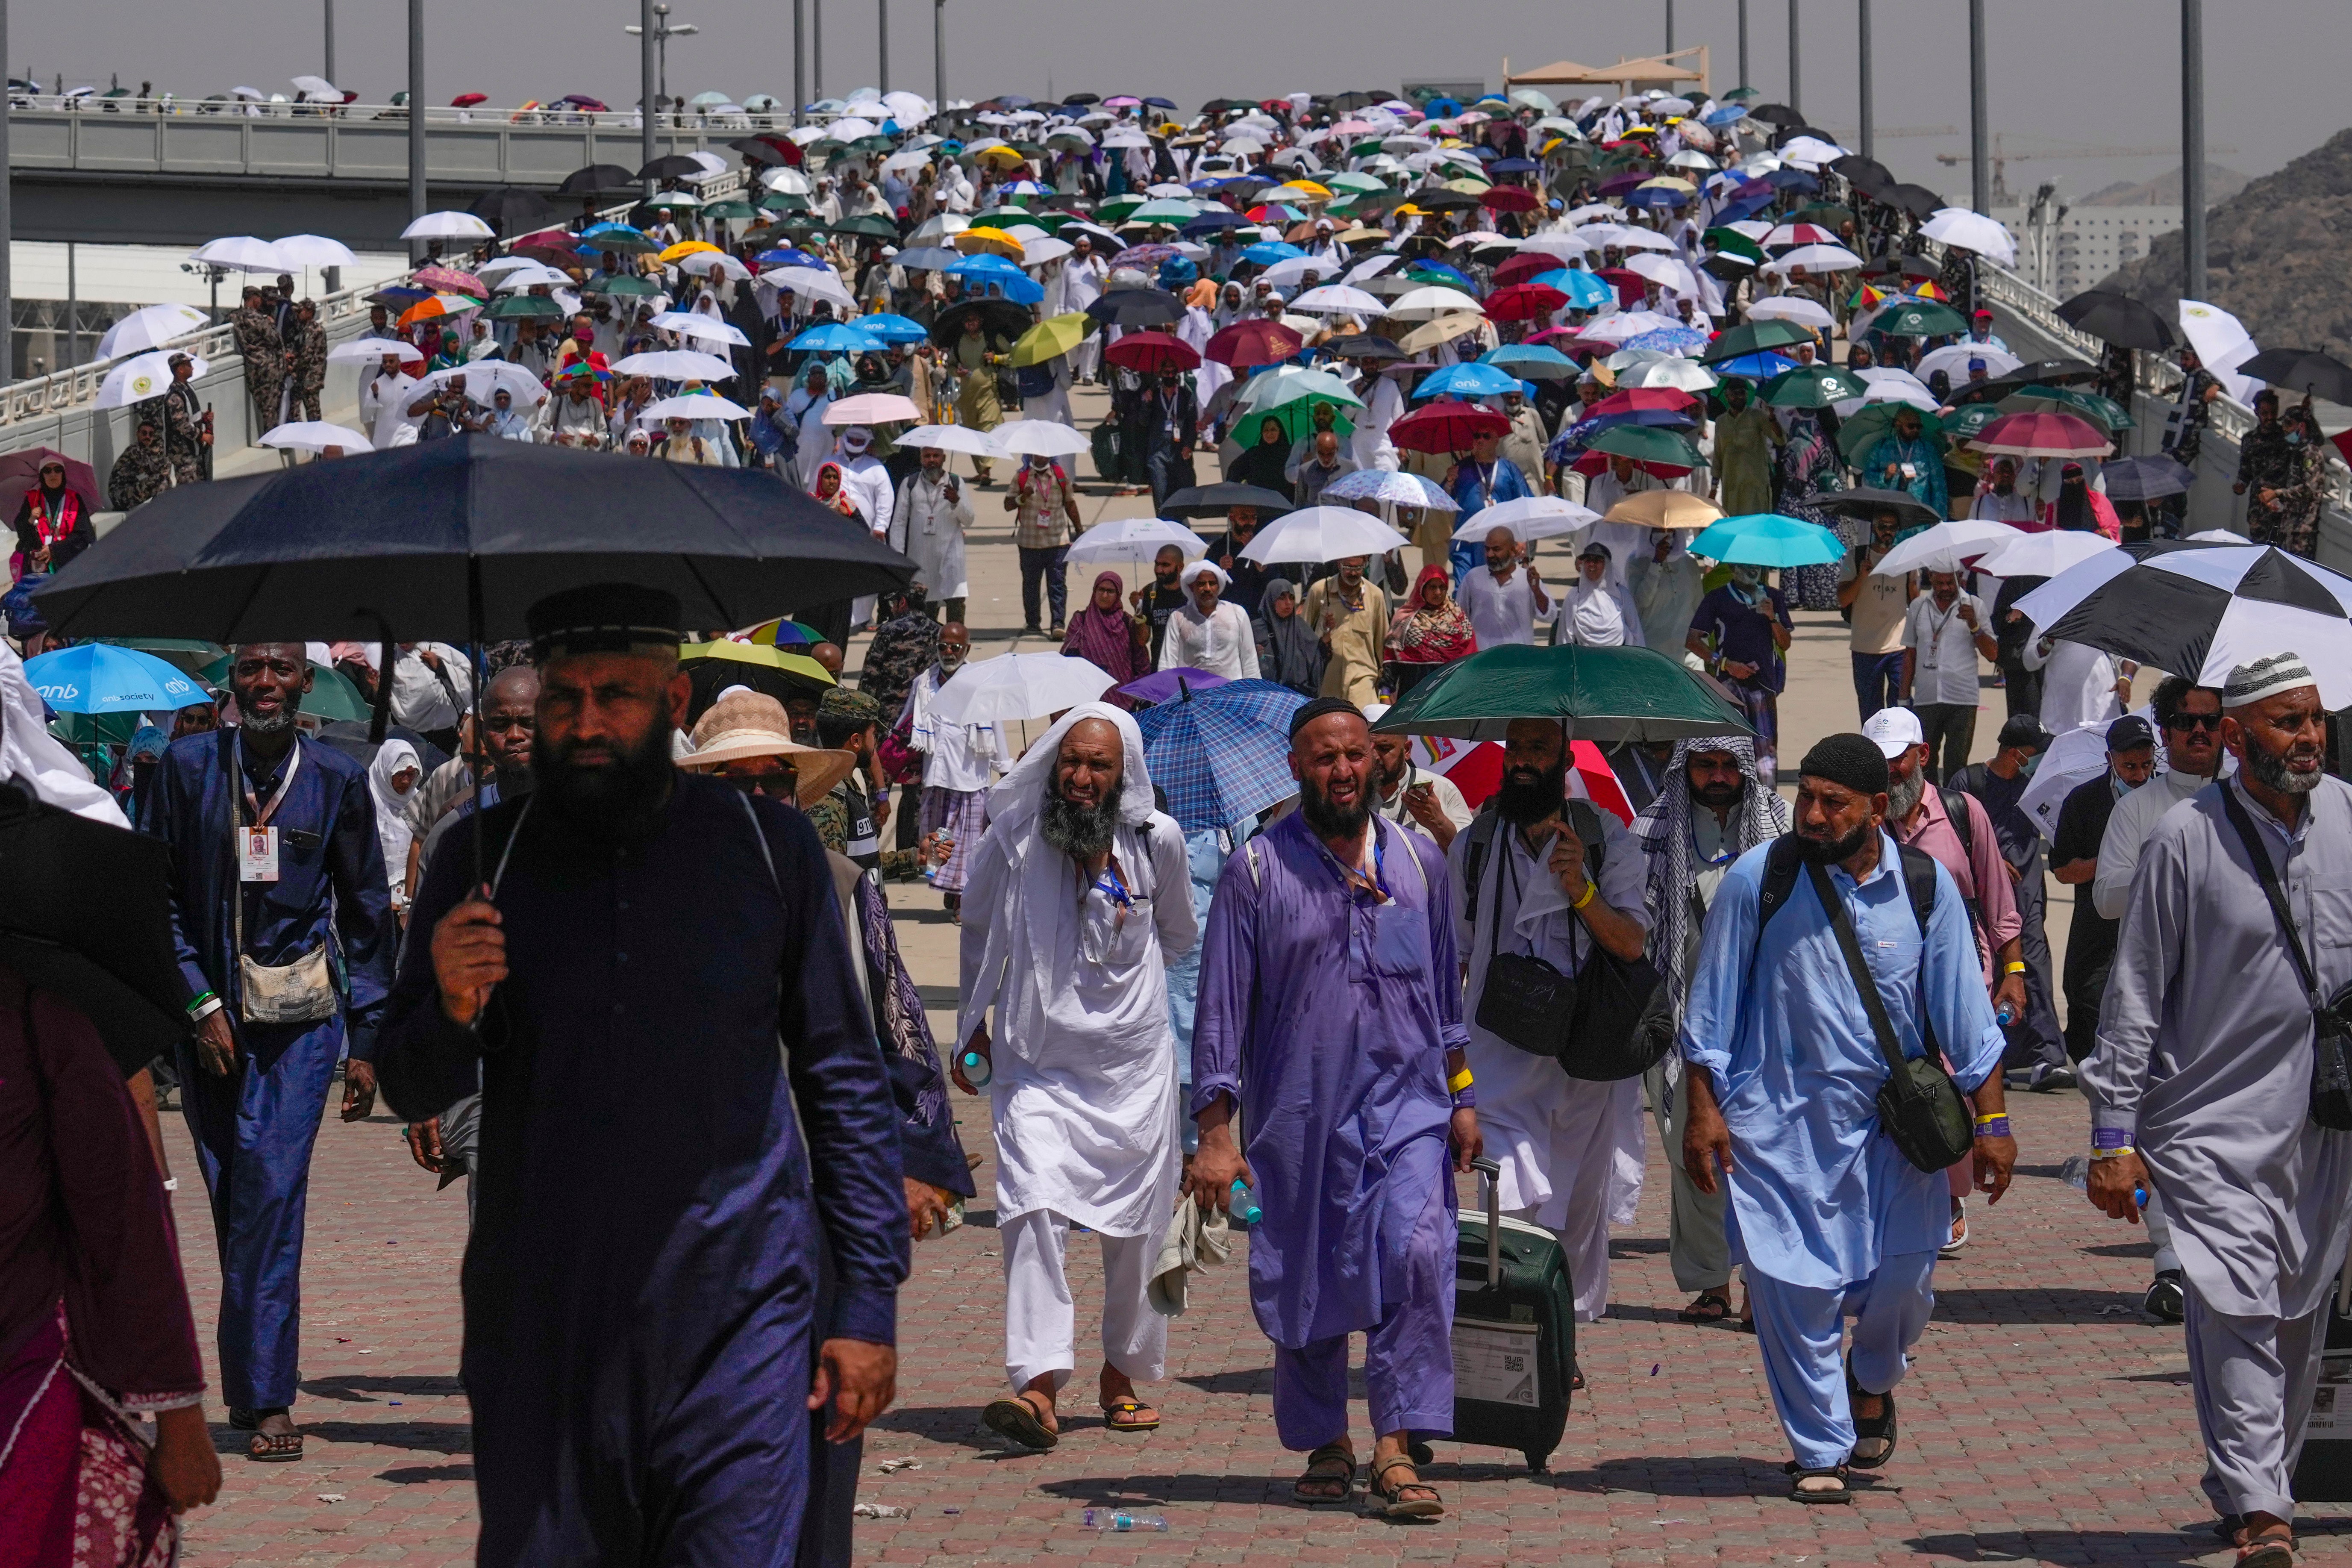 Pilgrims use umbrellas to shield themselves from the sun